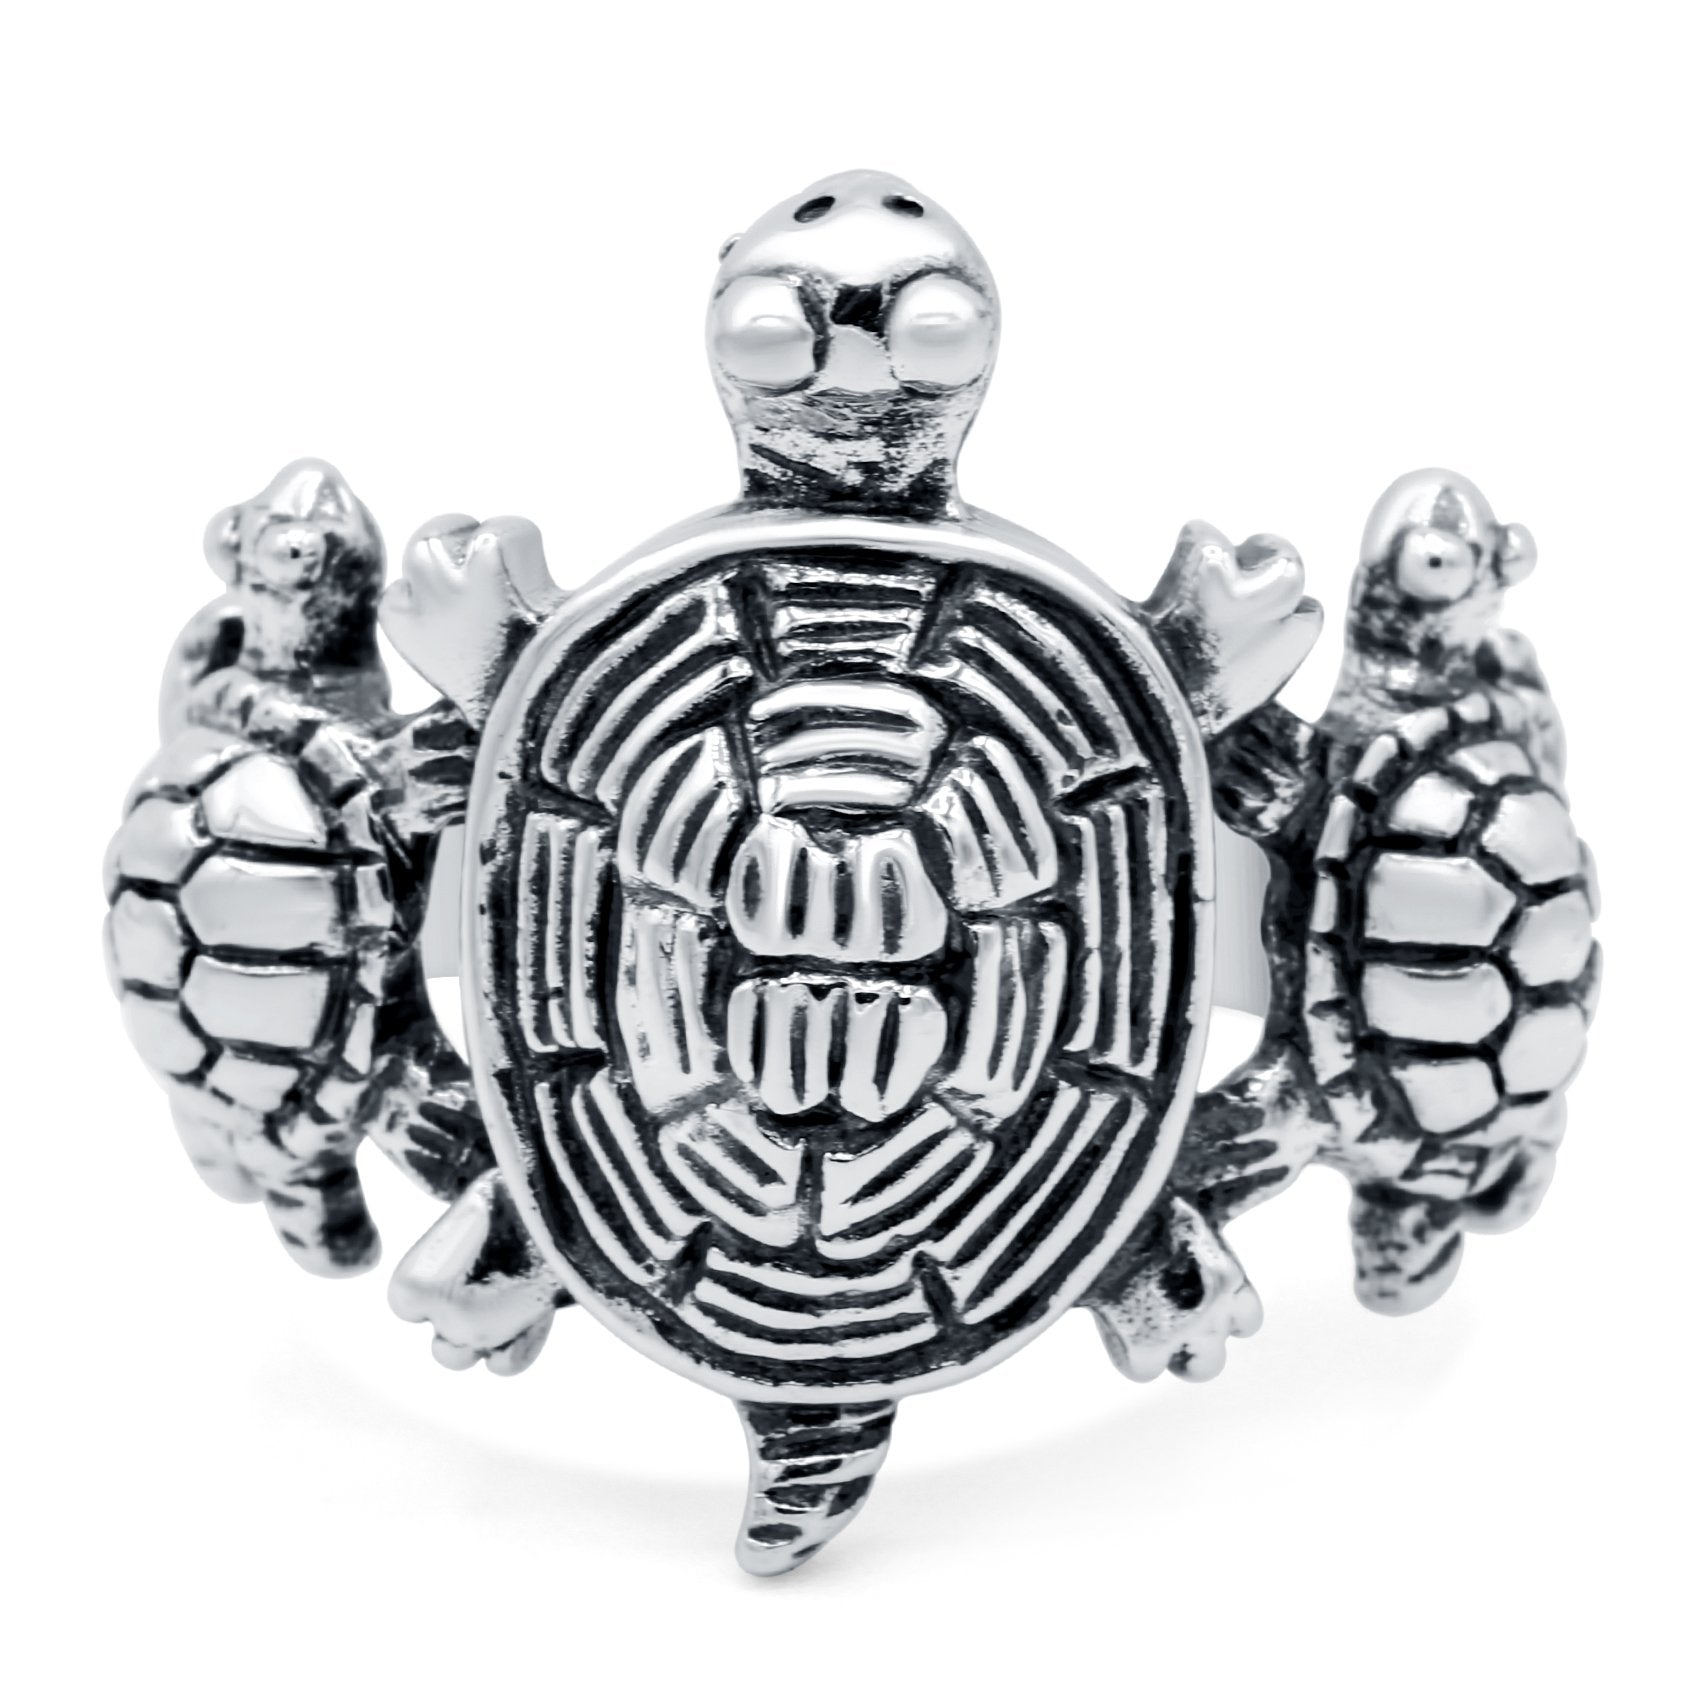 Turtles Oxidized Band Solid 925 Sterling Silver (19mm)